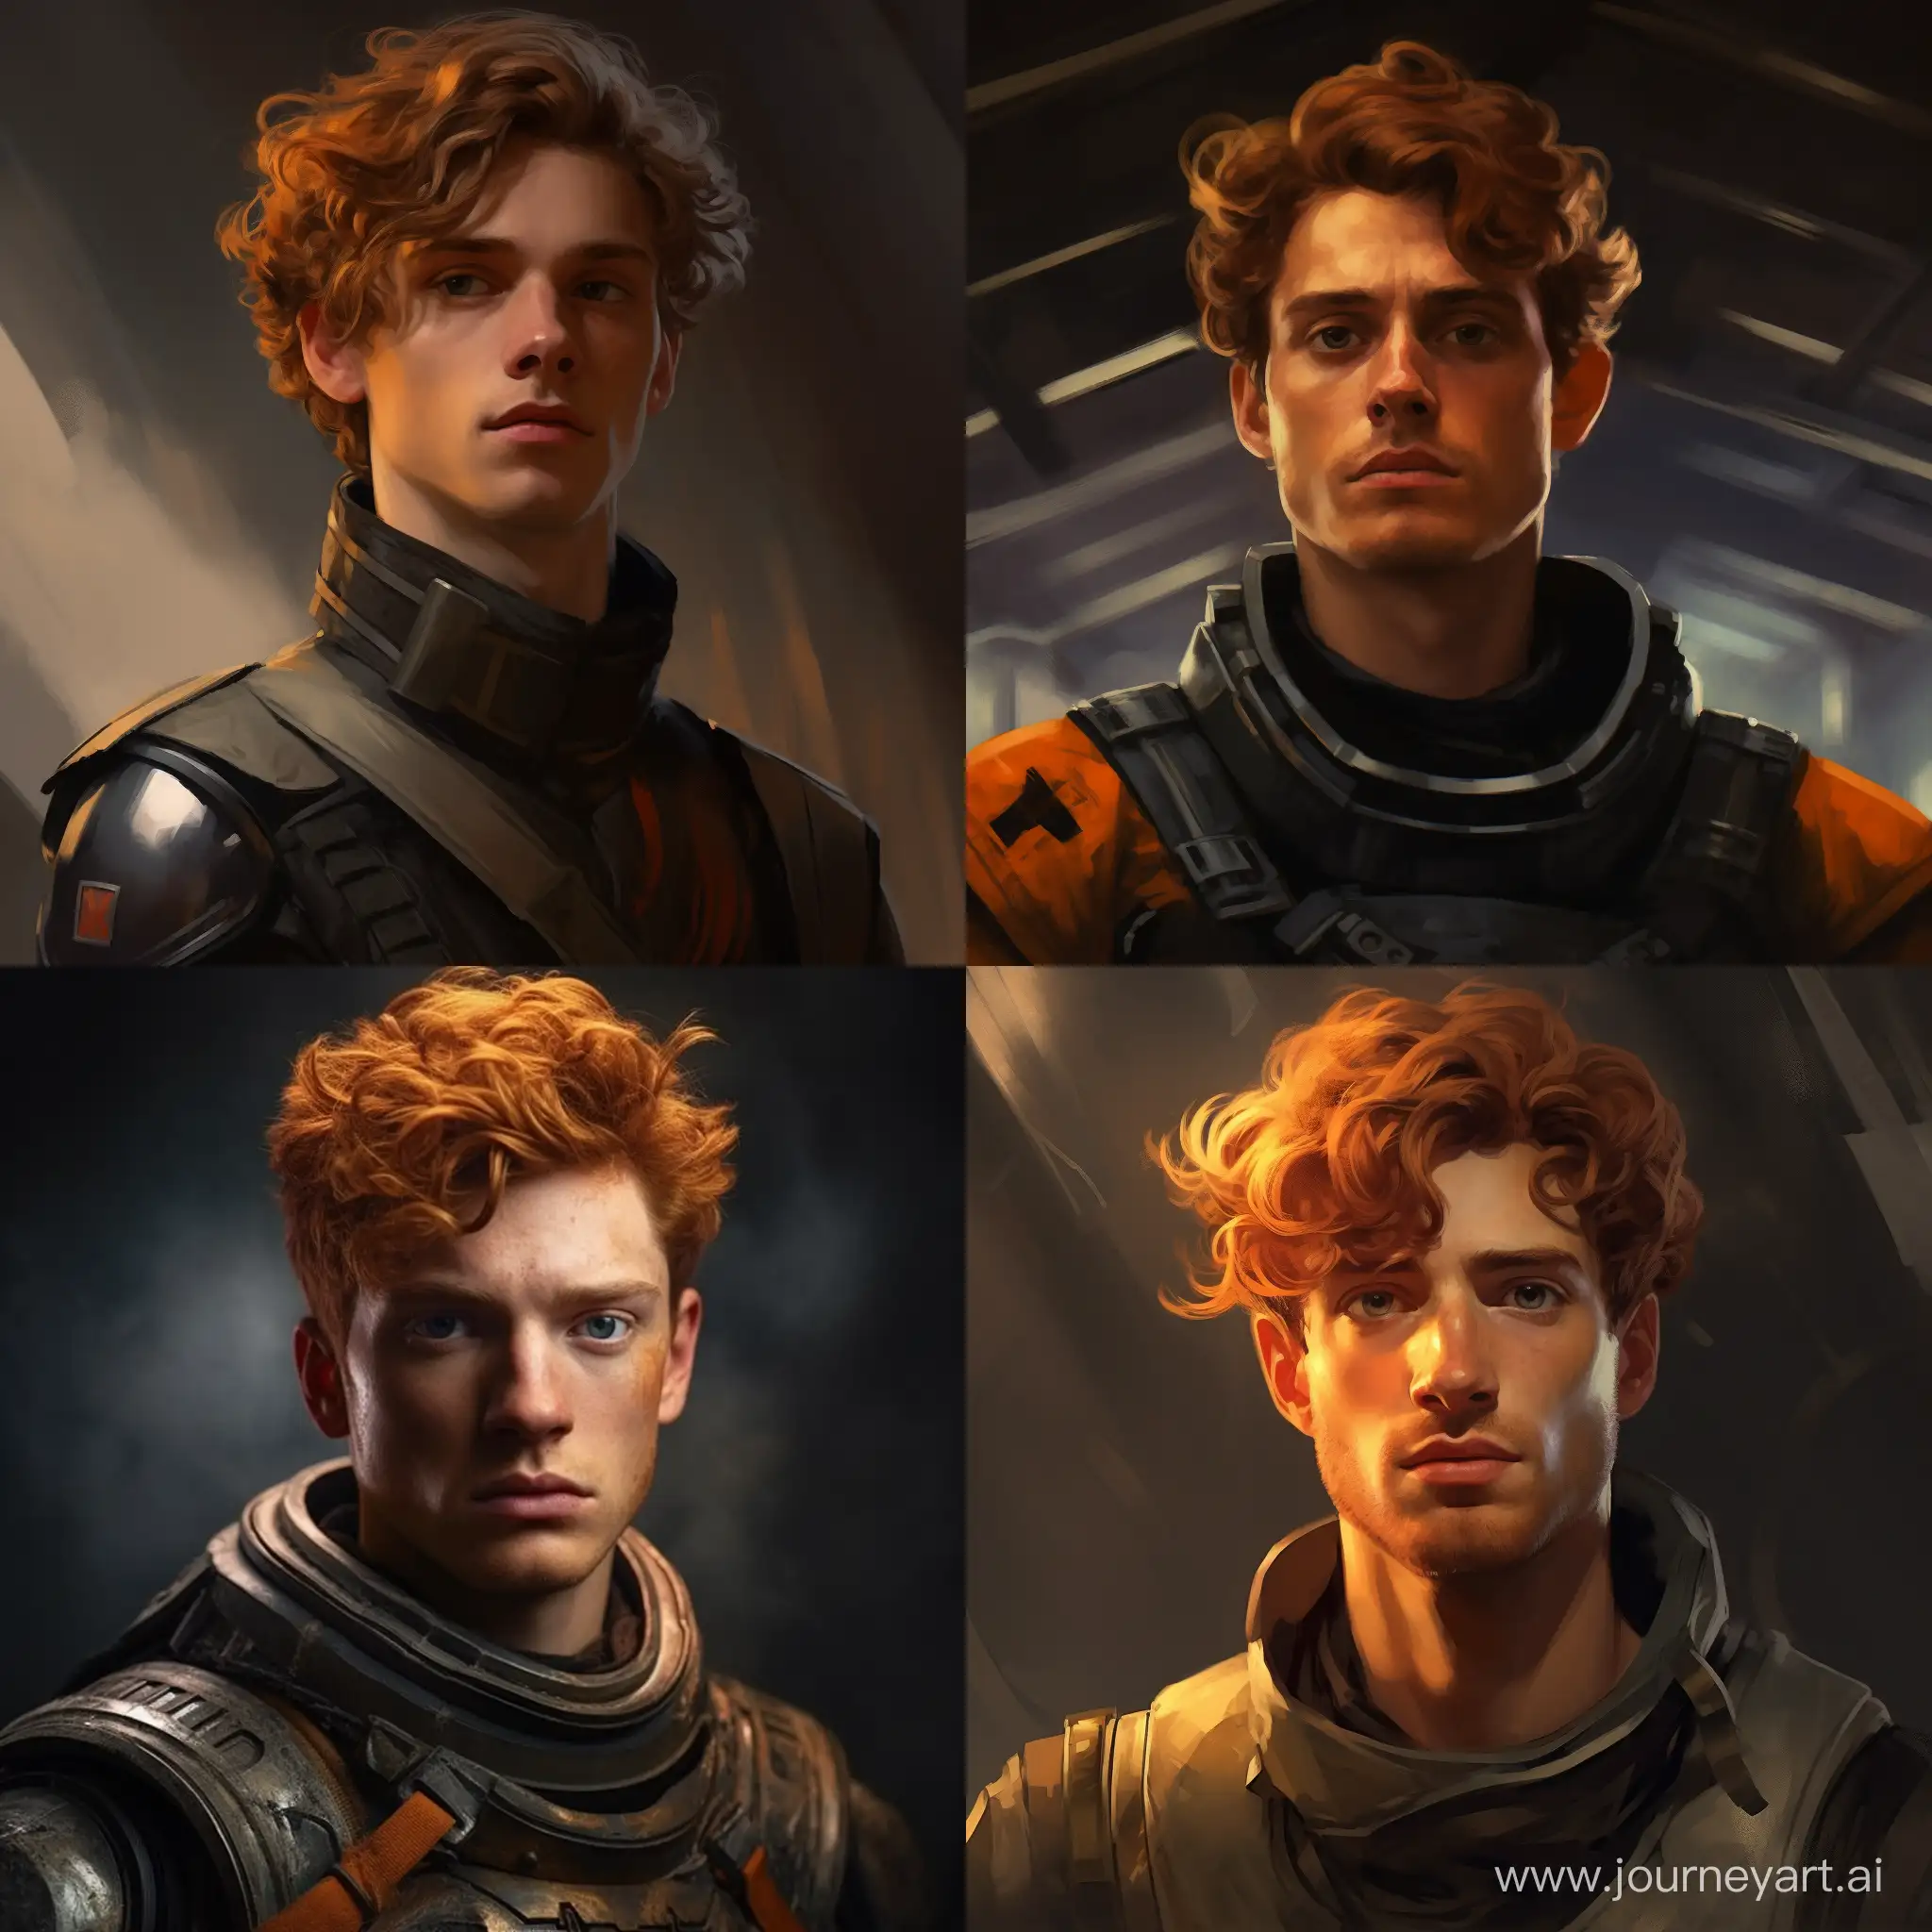 Courageous-European-Space-Pioneer-with-Russet-Hair-in-Cinematic-Portrait